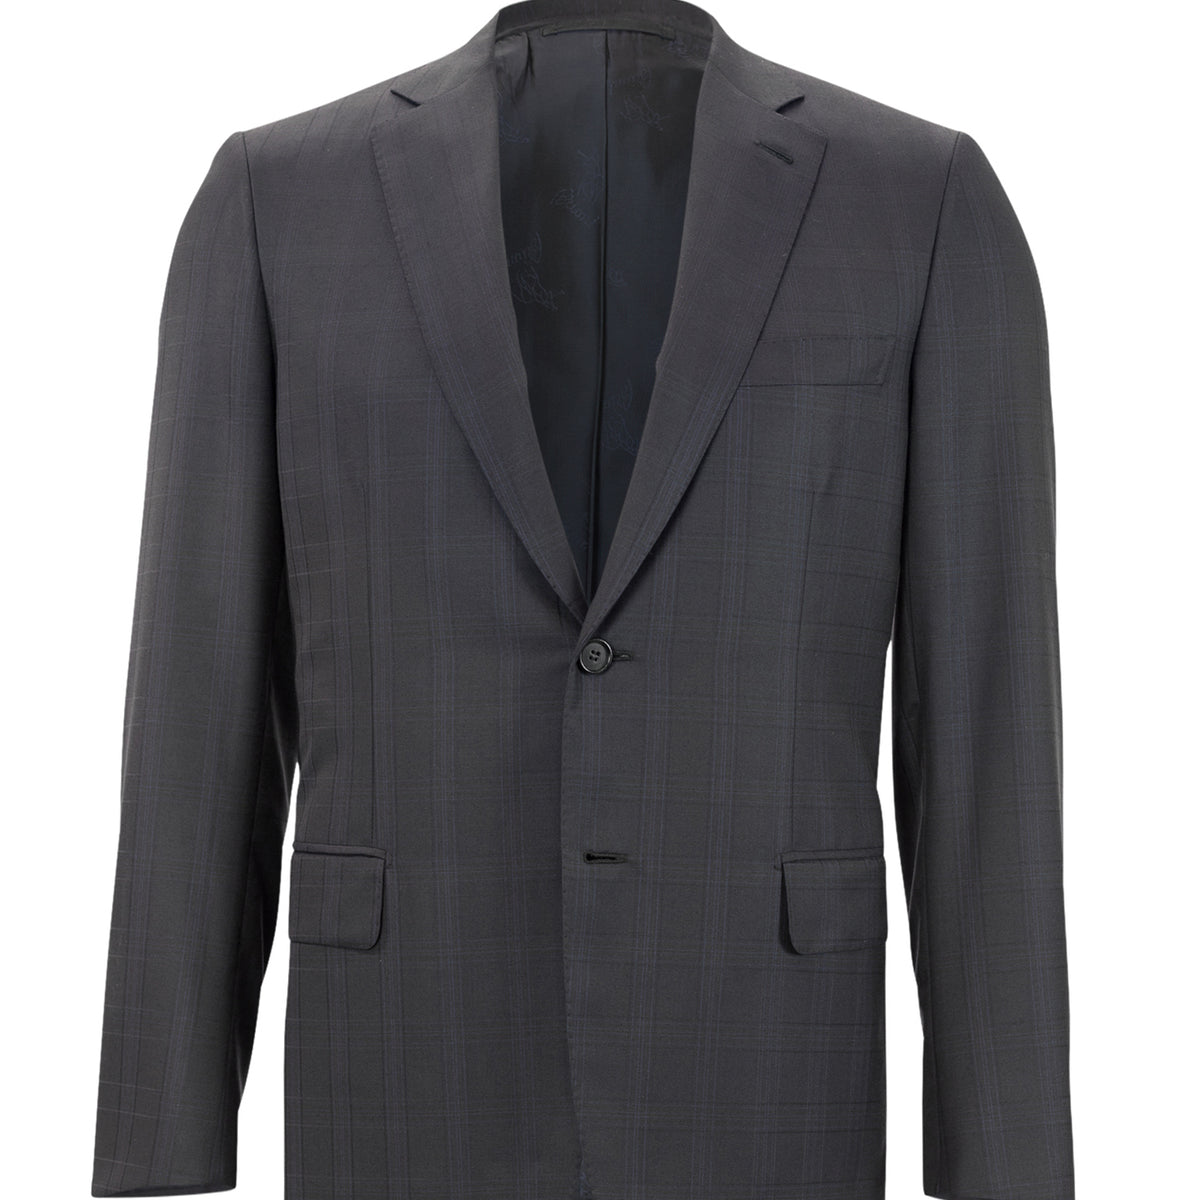 MADE-TO-MEASURE Brioni Suit — Mitchell Ogilvie